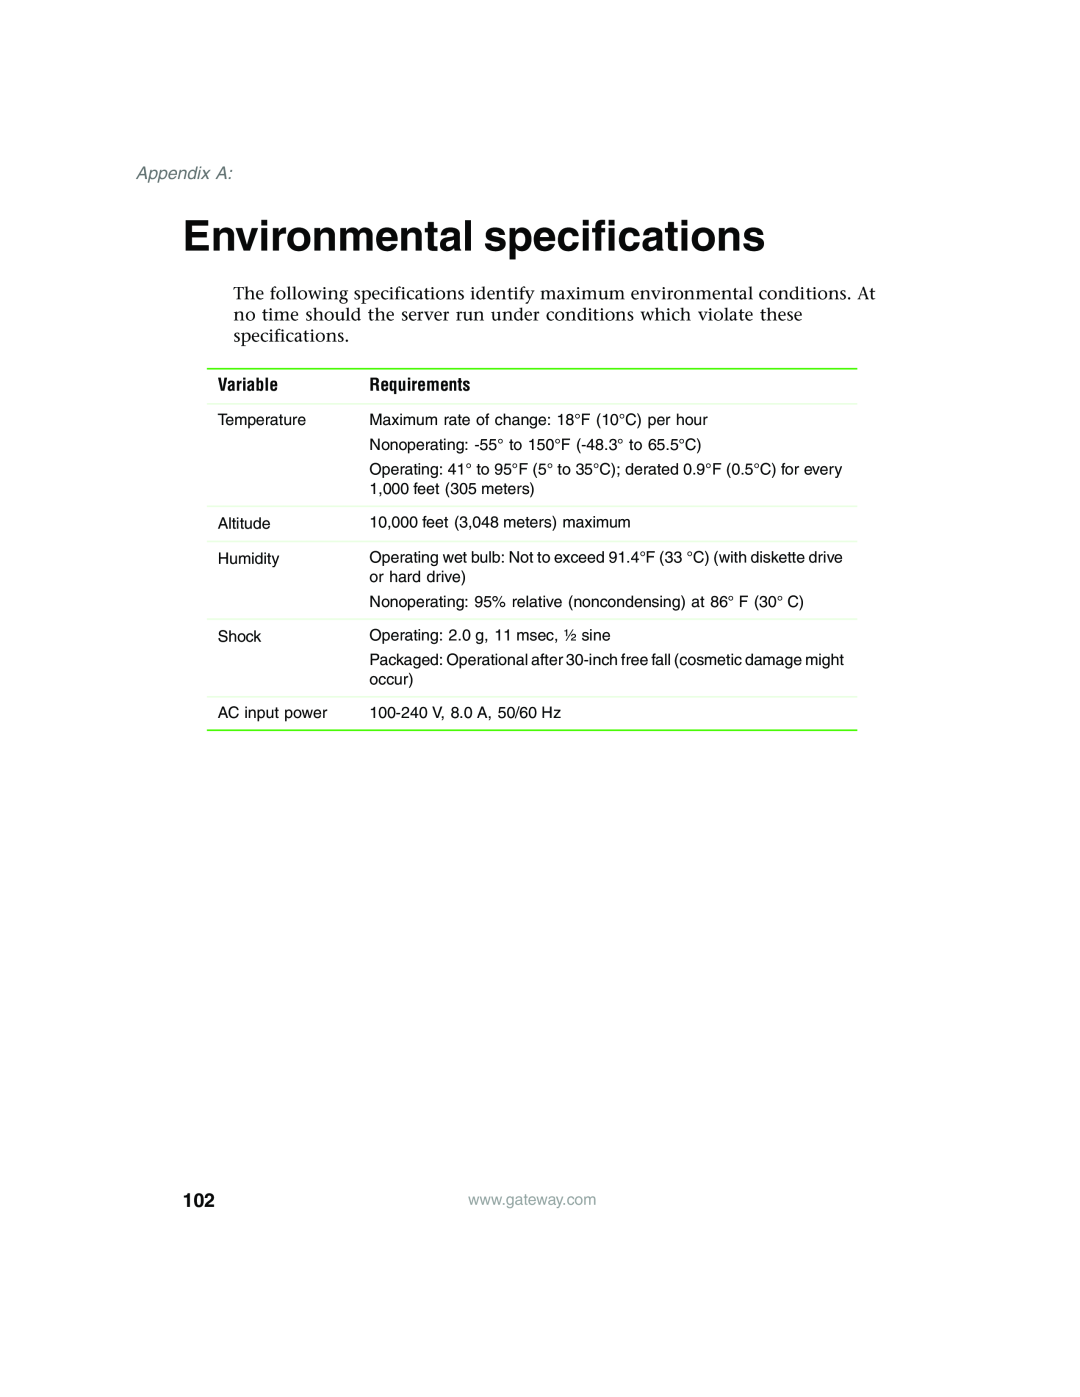 Gateway 980 manual Environmental specifications, Variable, Requirements, Appendix A 